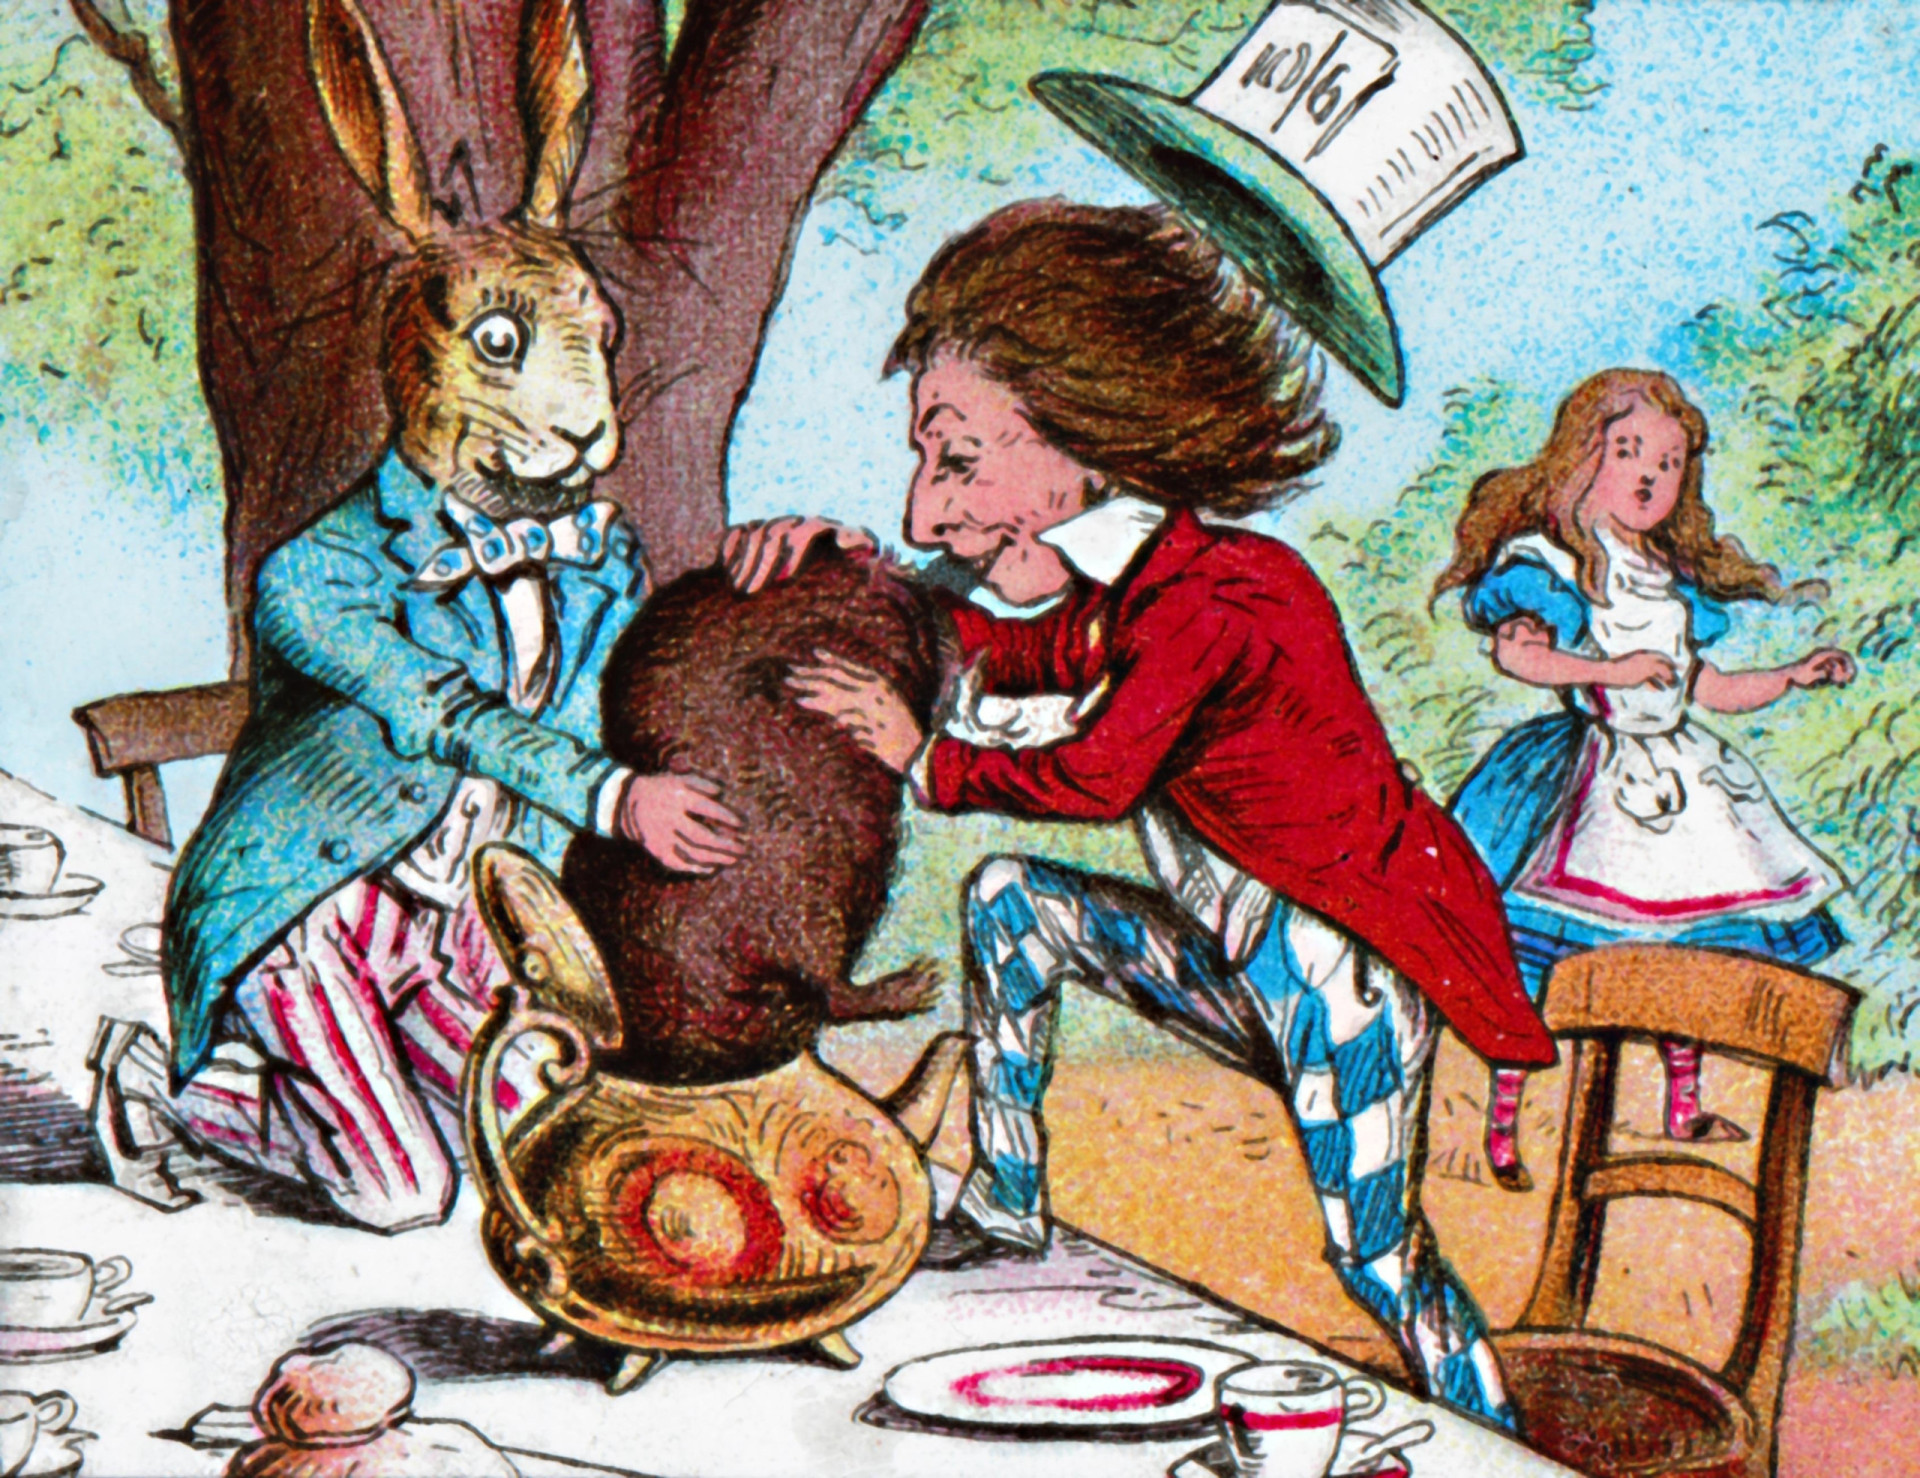 <p>Besides Alice, the previously described Mad Hatter's tea party numbers the March Hare and the Dormouse as guests. "Mad as a March hare" is an even older proverb than "<a href="https://www.starsinsider.com/lifestyle/502230/common-phrases-that-sound-terrifying-when-taken-literally" rel="noopener">mad as hatter</a>." A March hare describes a brown hare in the breeding season, noted for its leaping, boxing, and odd habit of chasing in circles. The dormouse, meanwhile, is slow and sleepy and constantly bullied by the Hatter and March Hare.</p><p>You may also like:<a href="https://www.starsinsider.com/n/304638?utm_source=msn.com&utm_medium=display&utm_campaign=referral_description&utm_content=558001en-en"> Funny celebrity moments: pranksters on the red carpet</a></p>